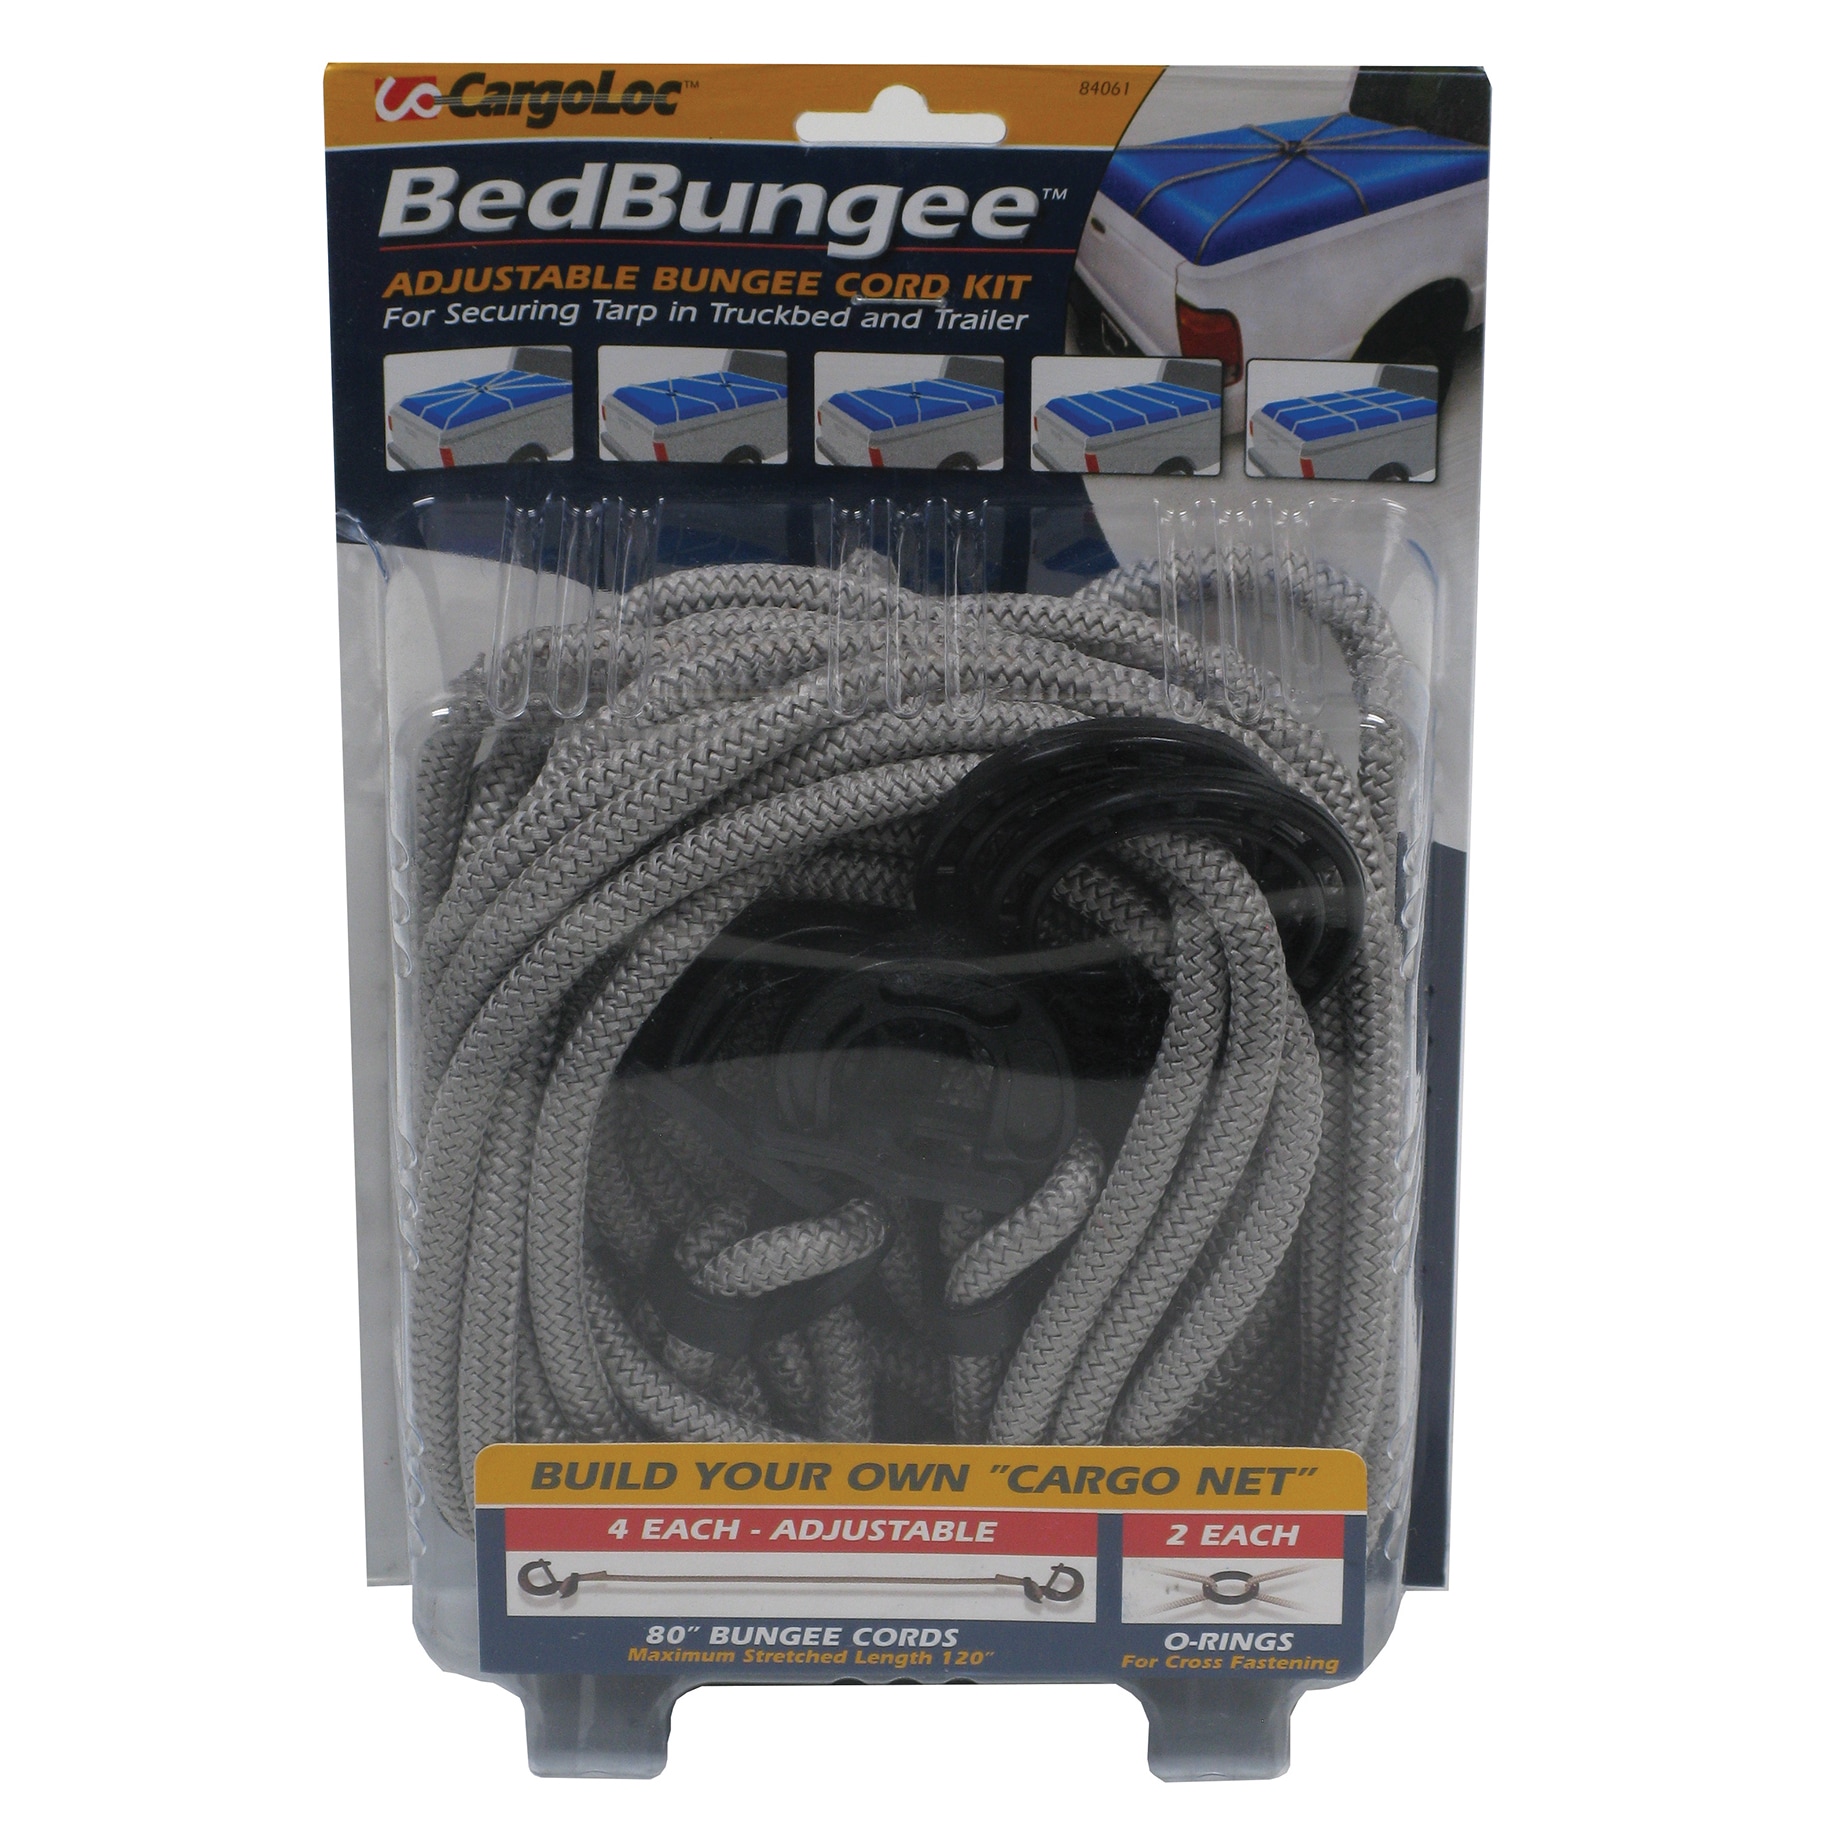 4 inch bungee cords